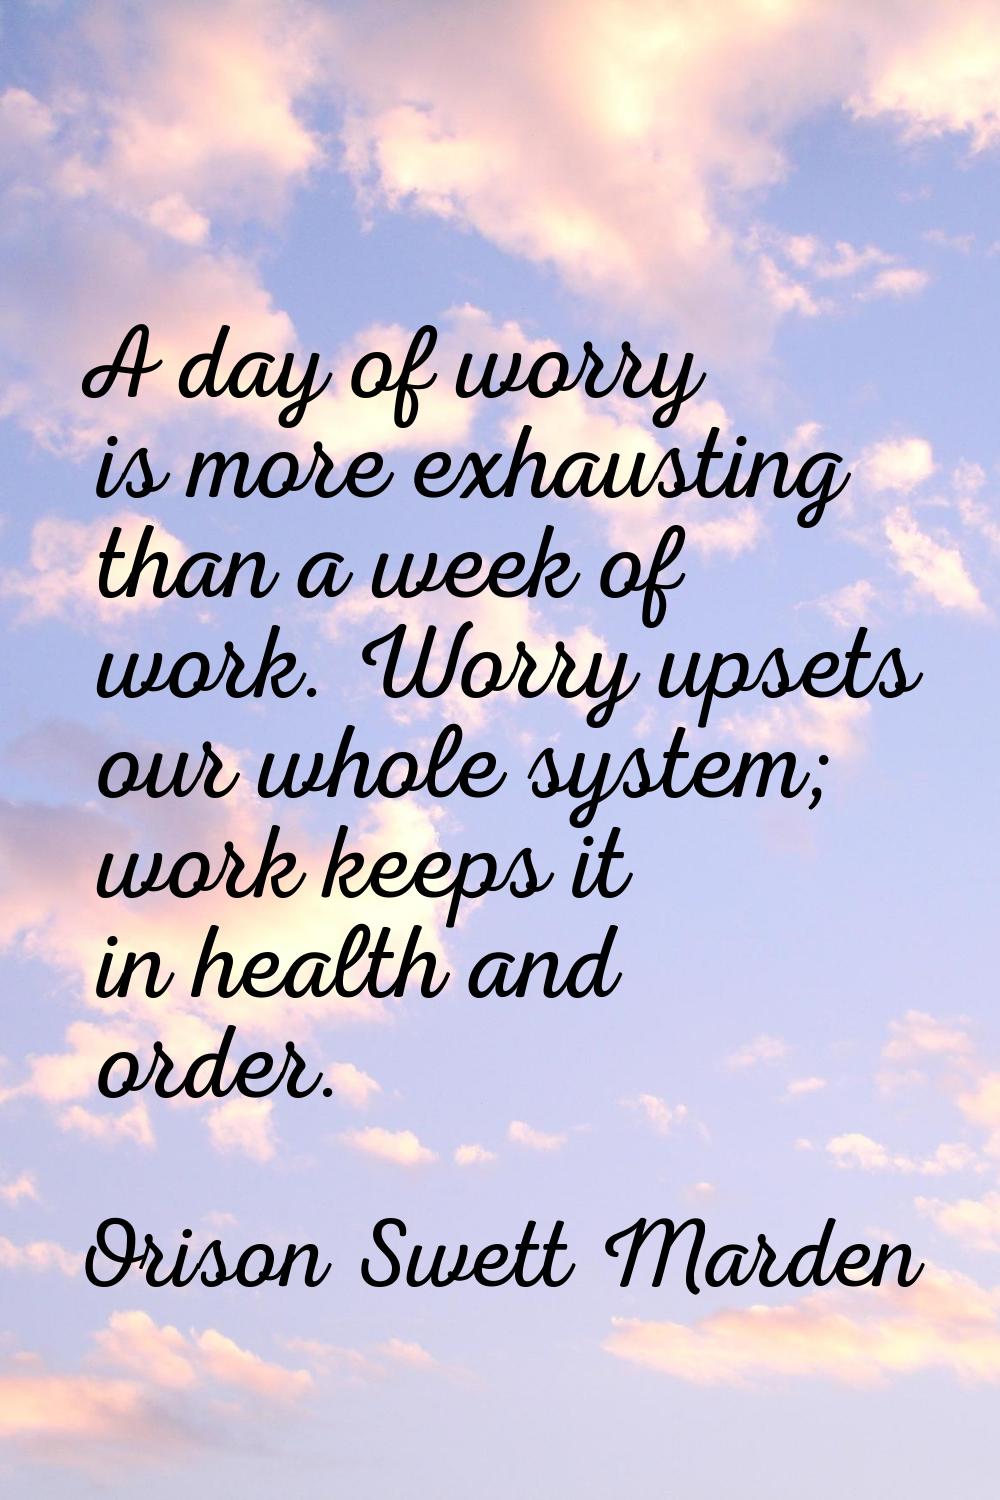 A day of worry is more exhausting than a week of work. Worry upsets our whole system; work keeps it